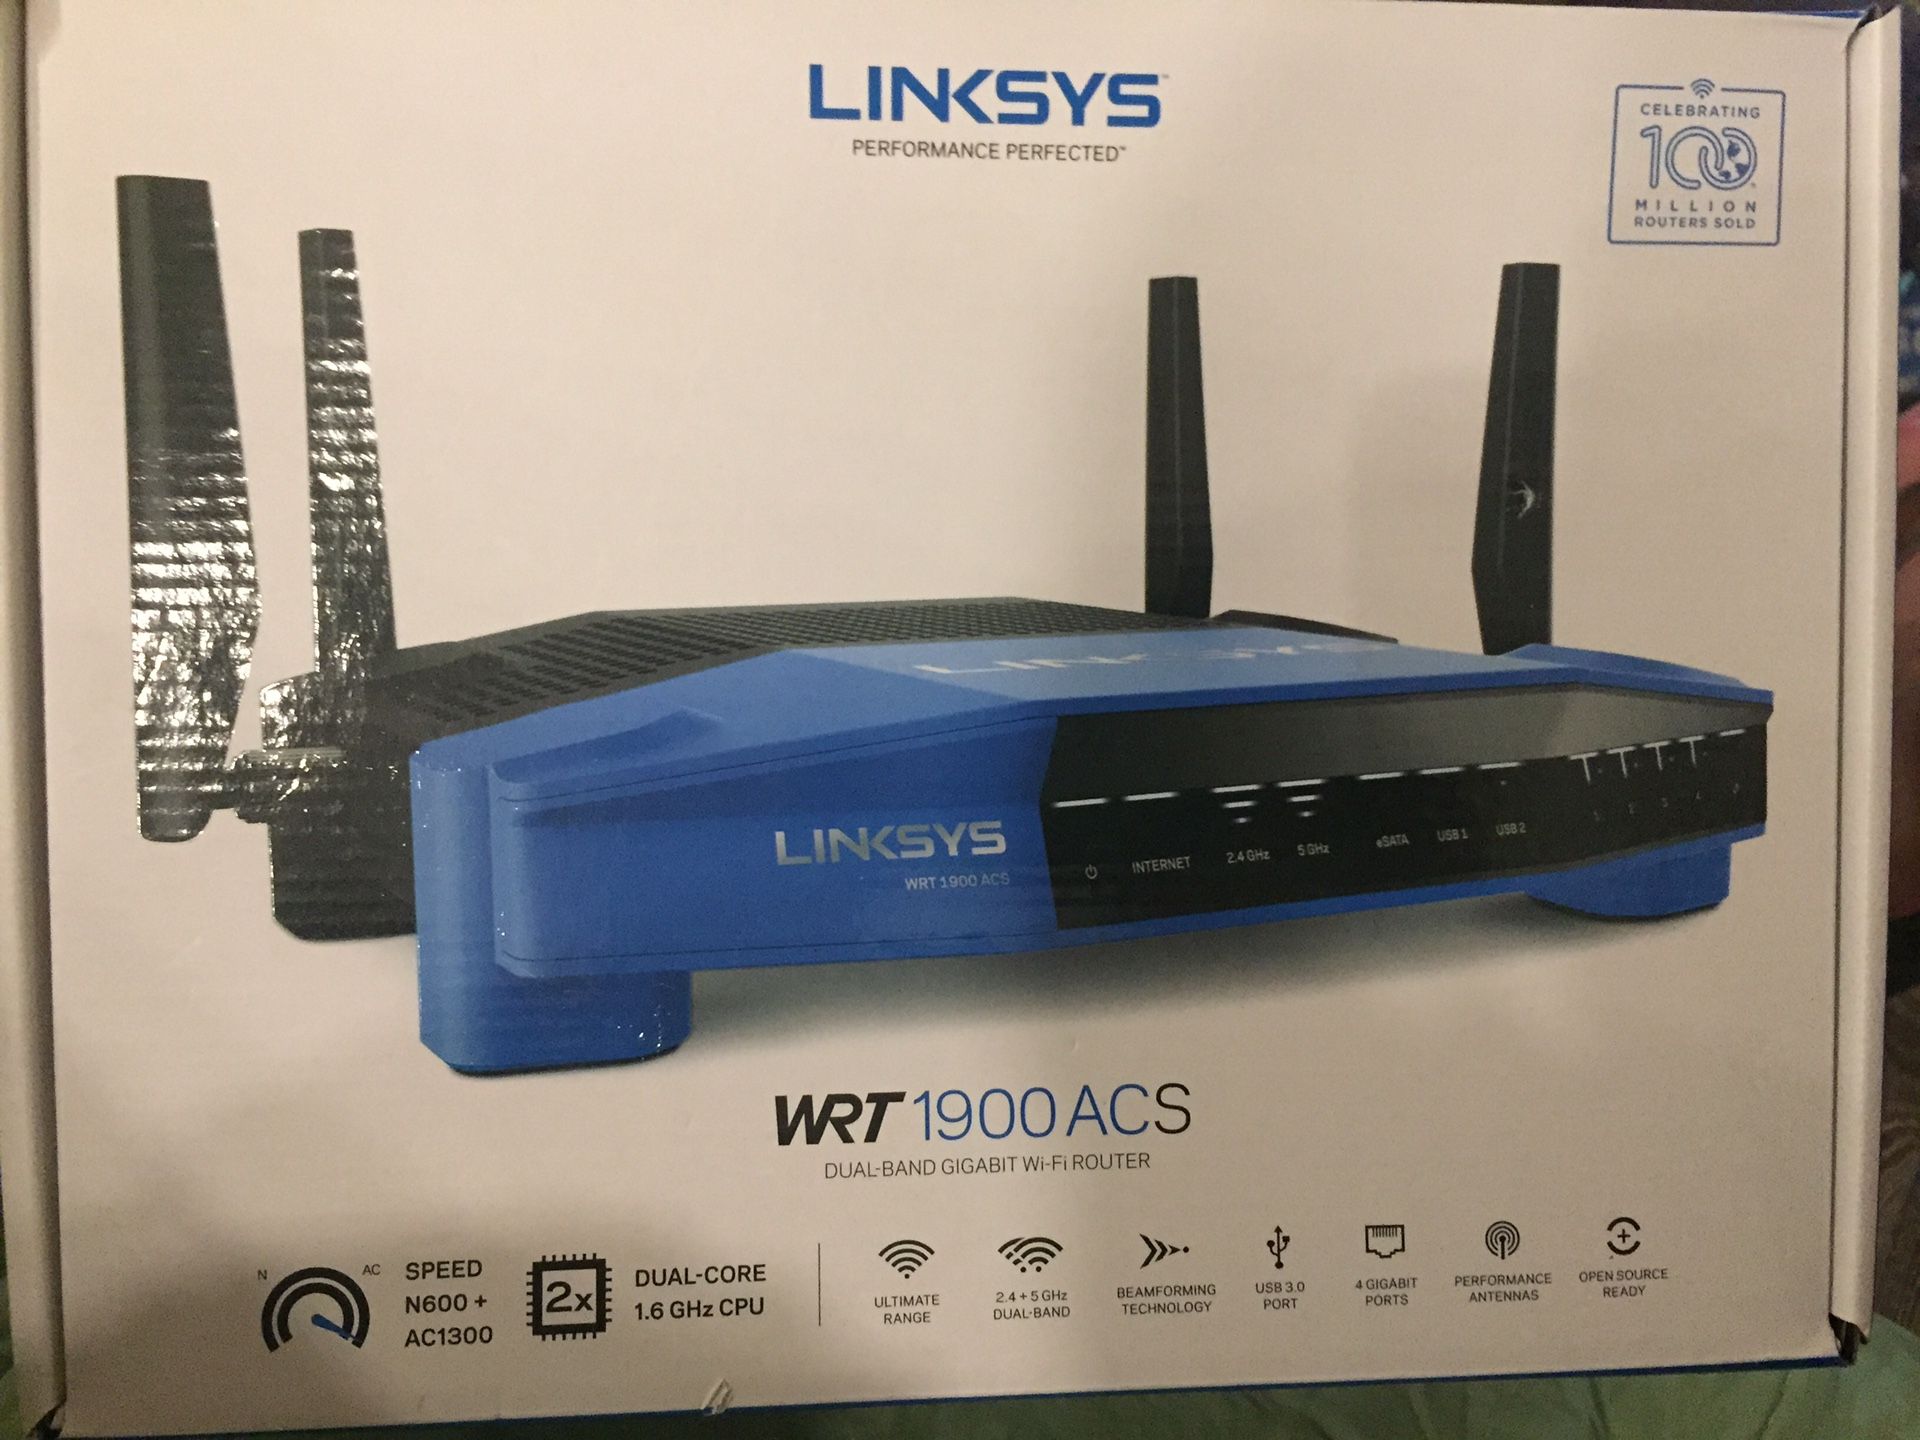 Linksys WRT1900ACS Dual Band WiFi Router